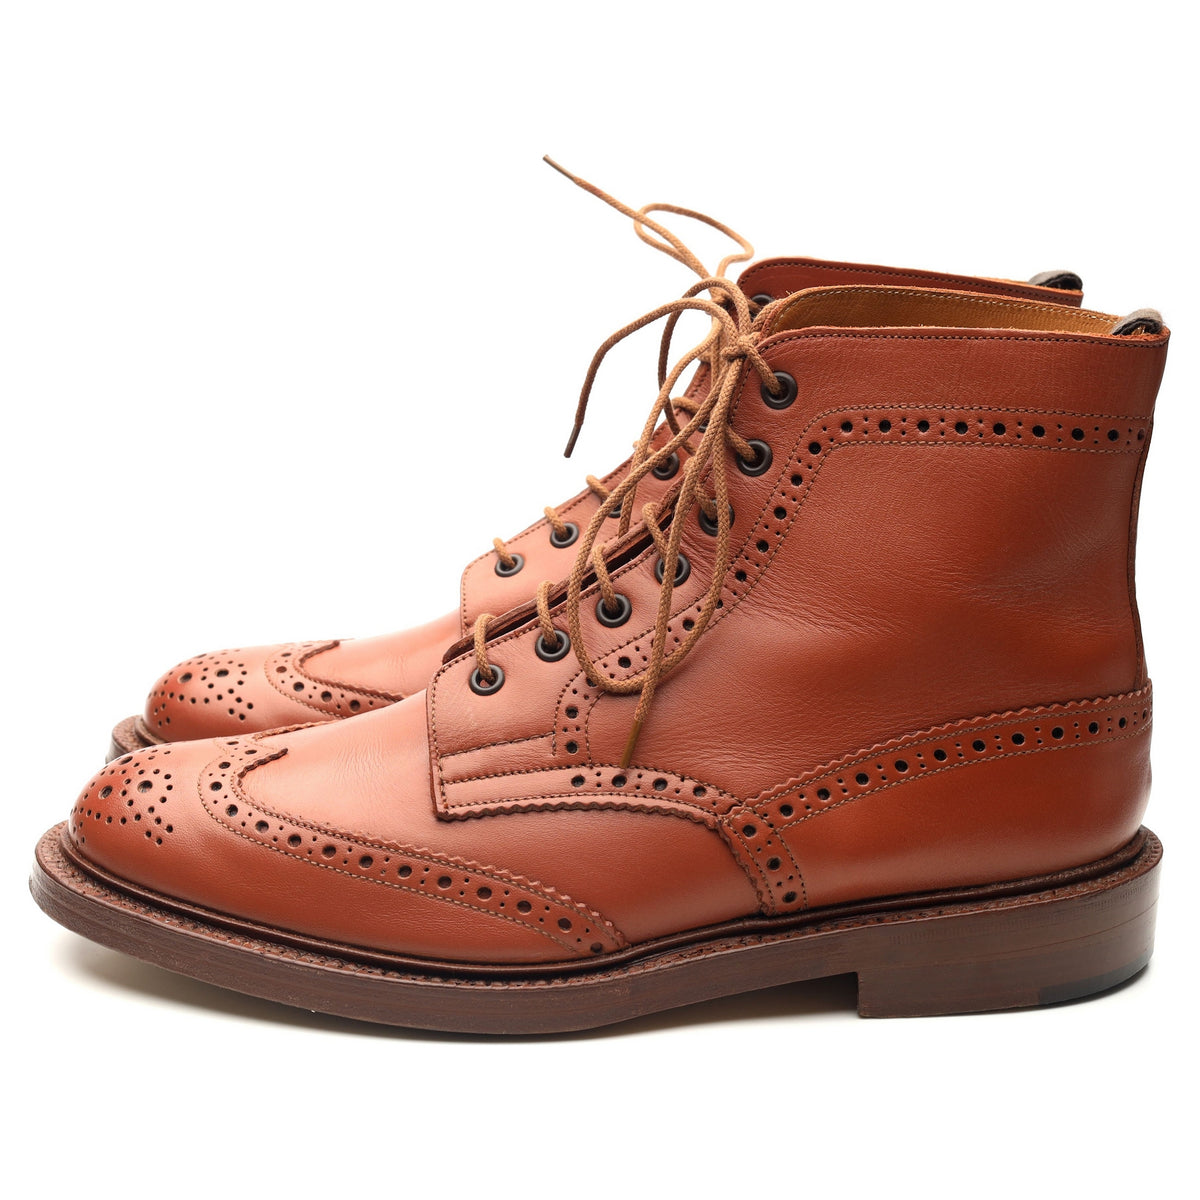 Malton' Tan Brown Leather Brogue Boots UK 10 - Abbot's Shoes